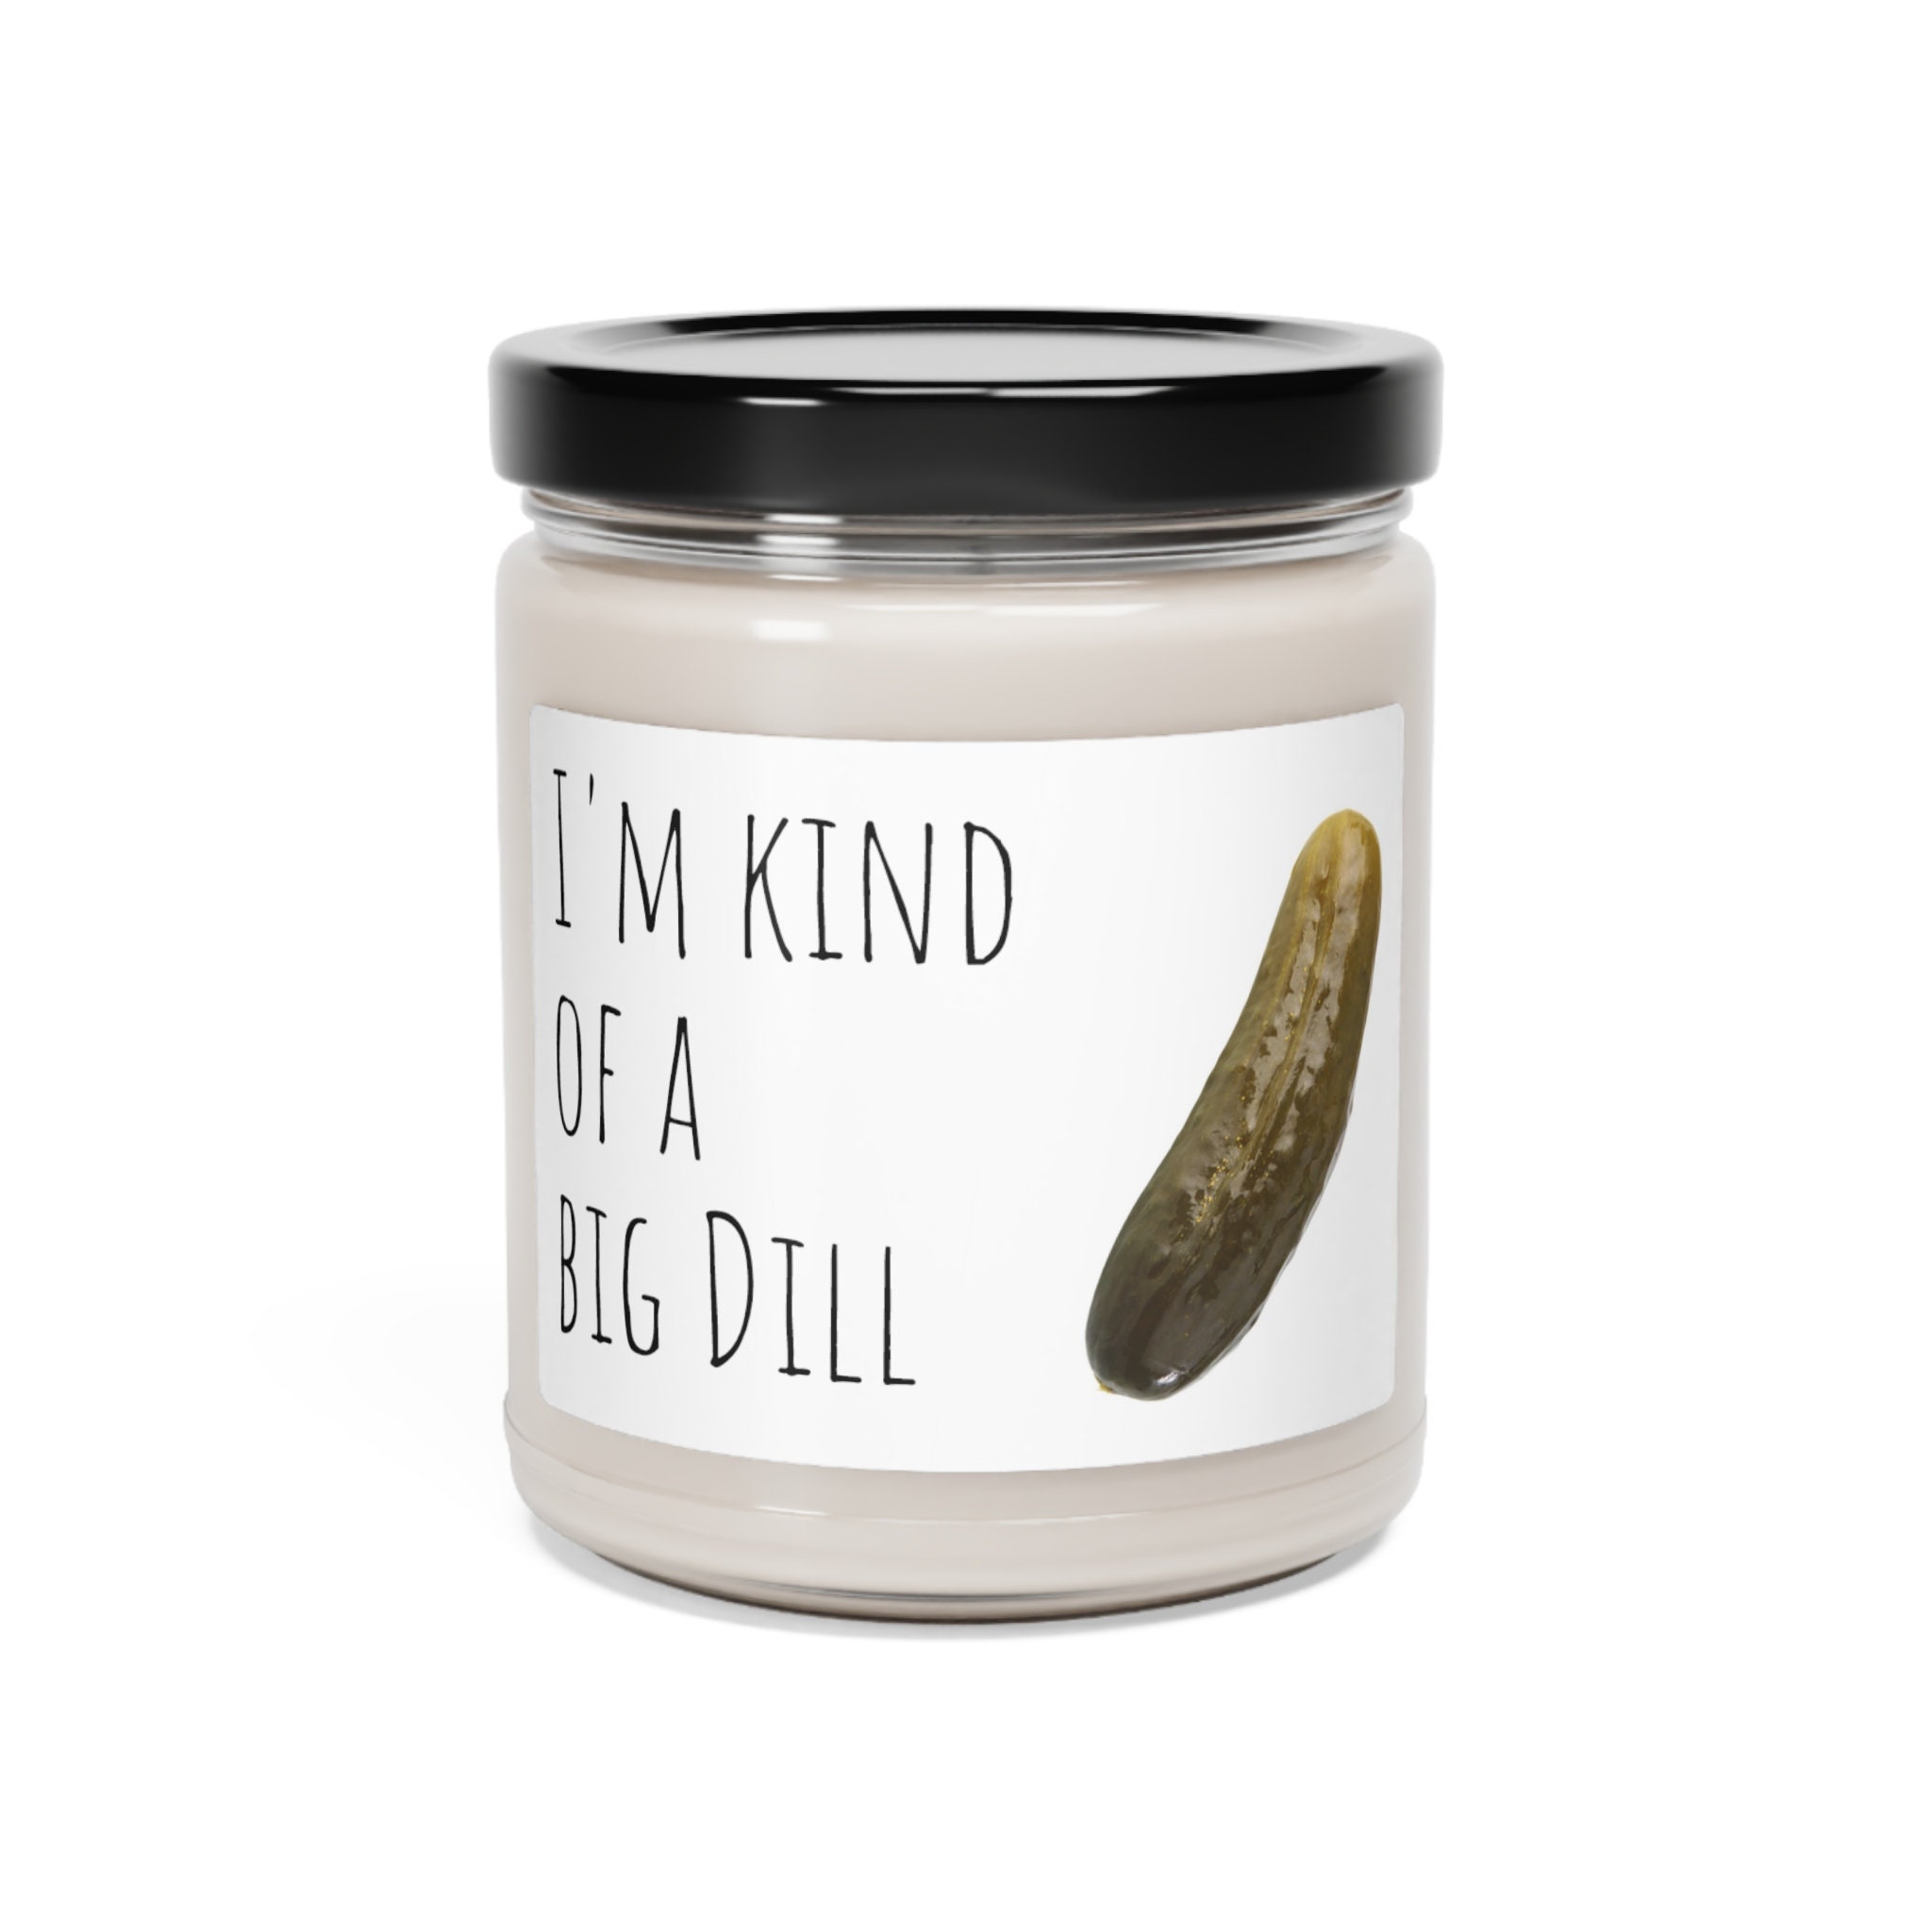 Pickle Scented Candle: Pickle Jar, Pickles in a Jar, Pickles Gifts, Chef  Gift, Triathlon Gifts, Candles, Man Cave Gifts, Man Gifts, Cooking 